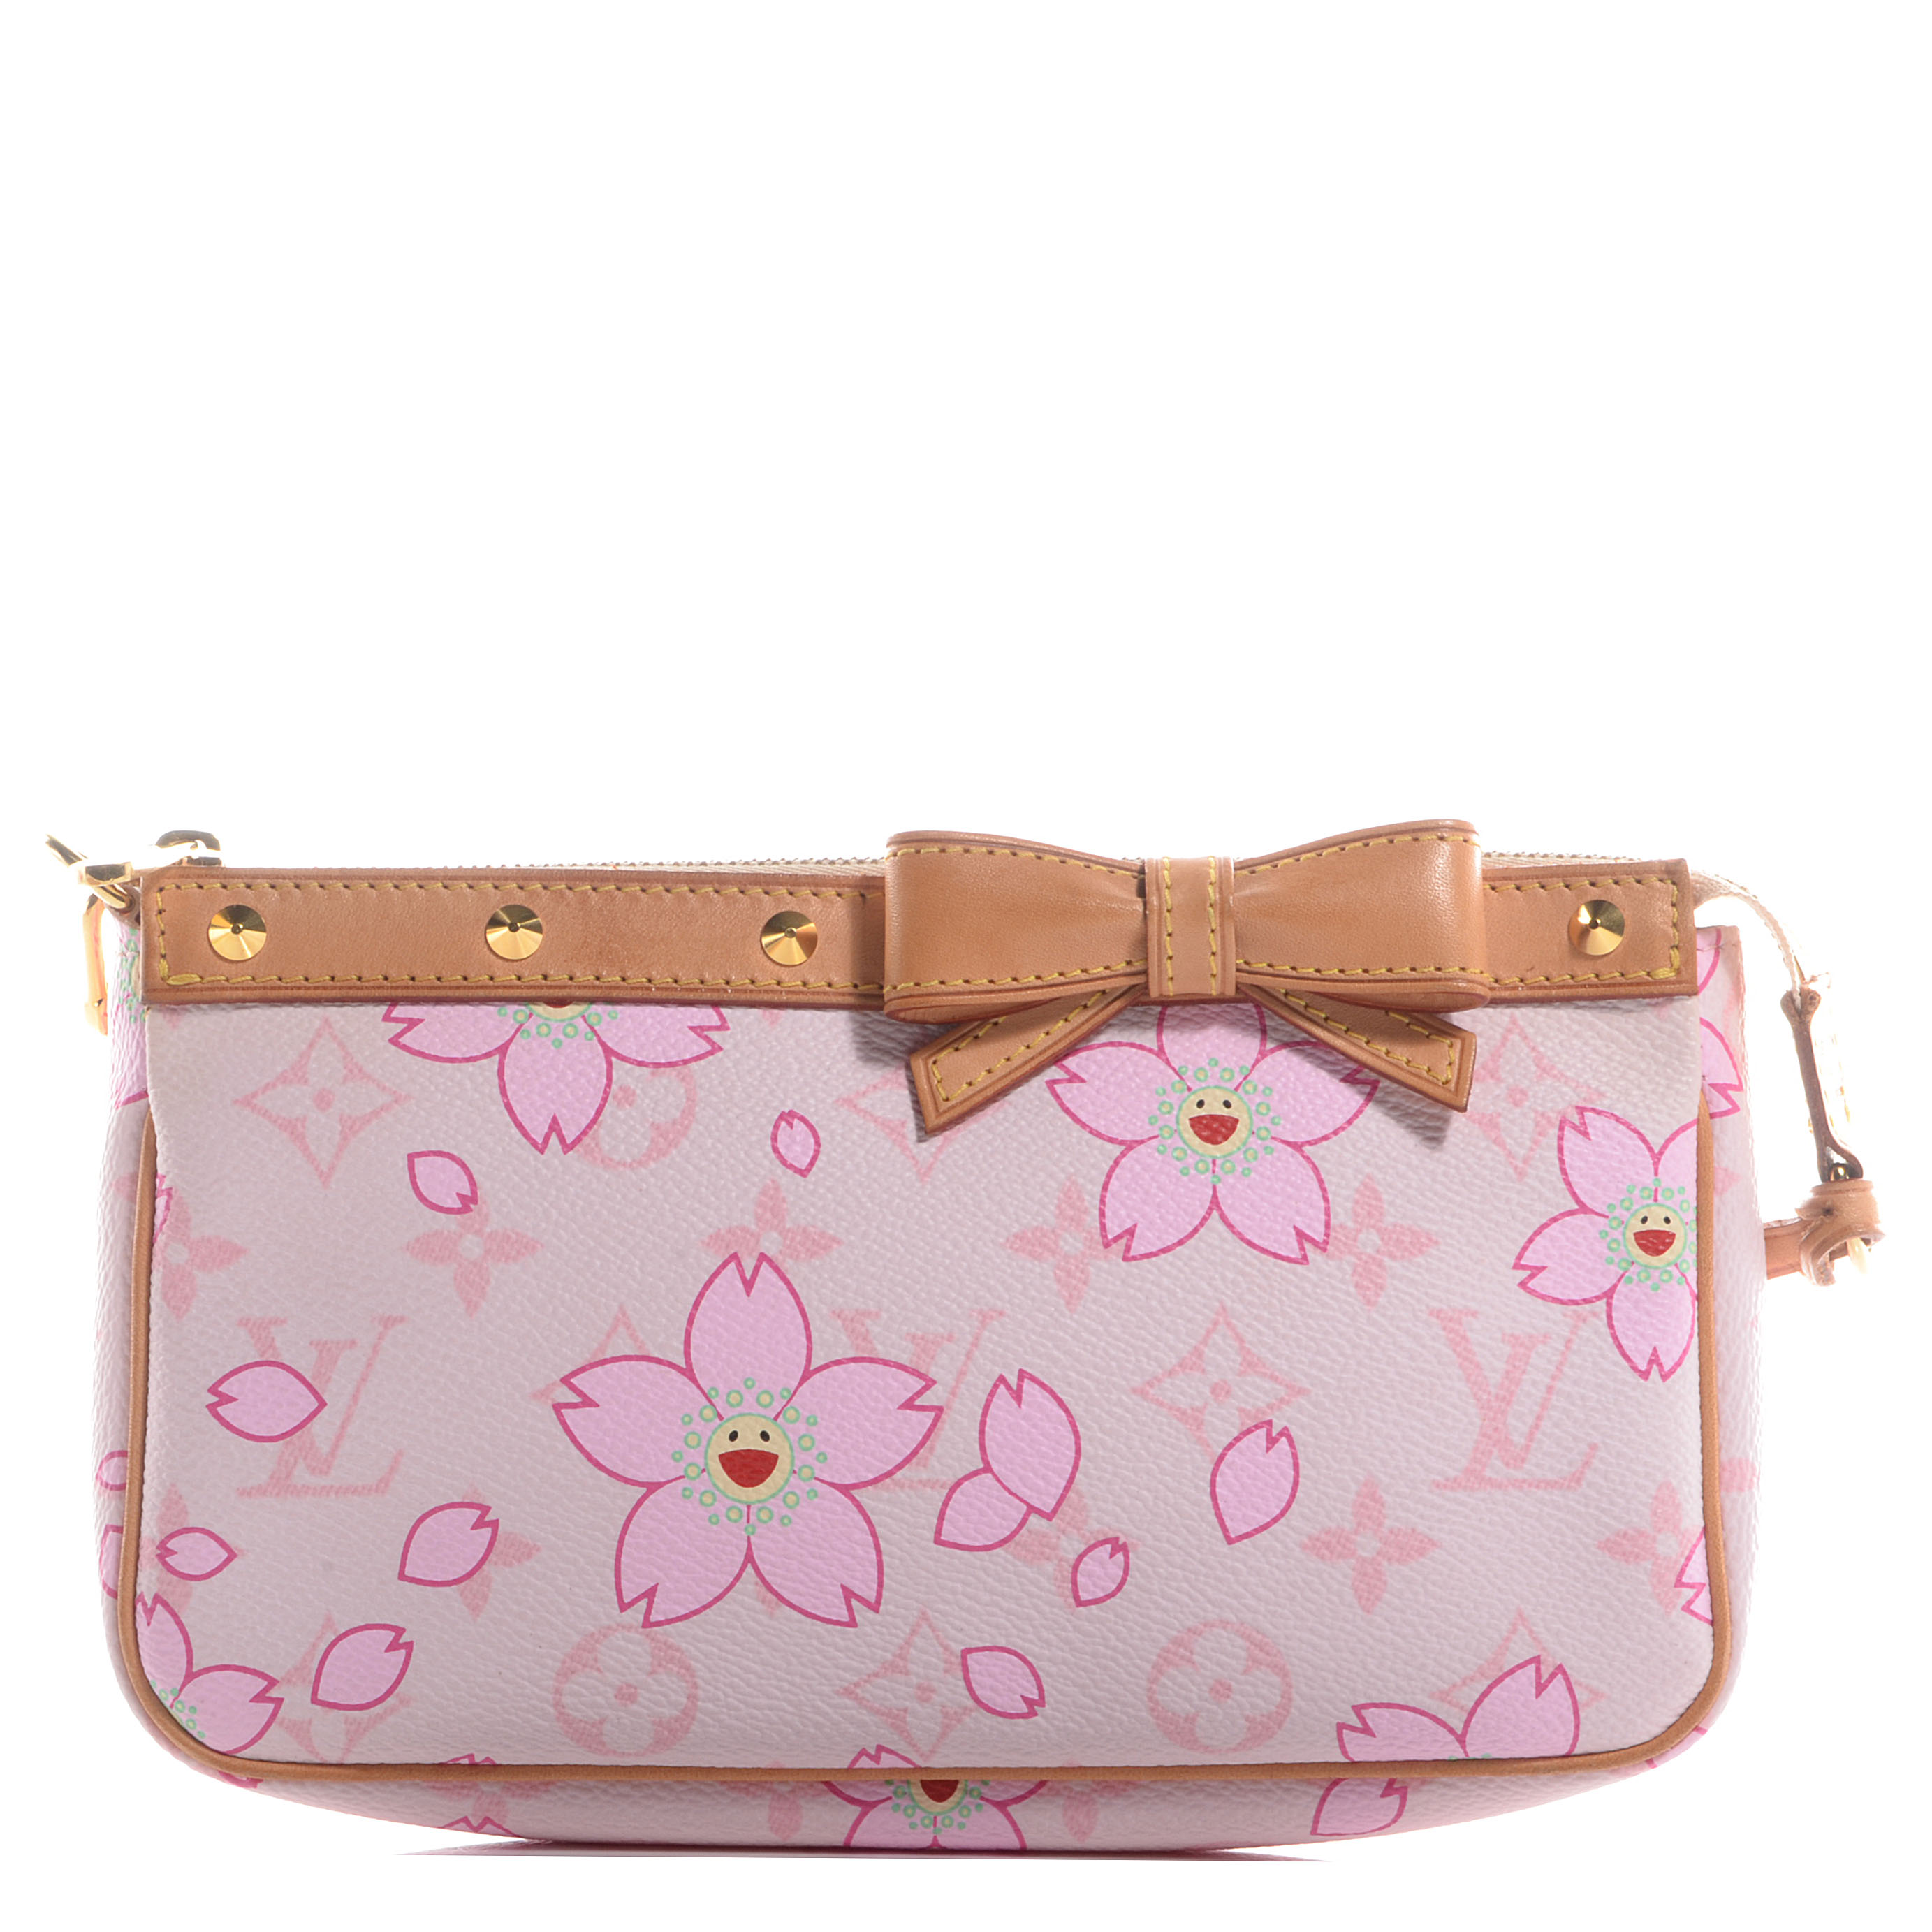 Lv cherry blossom pouchette🌸 one of the bags Regina carried in